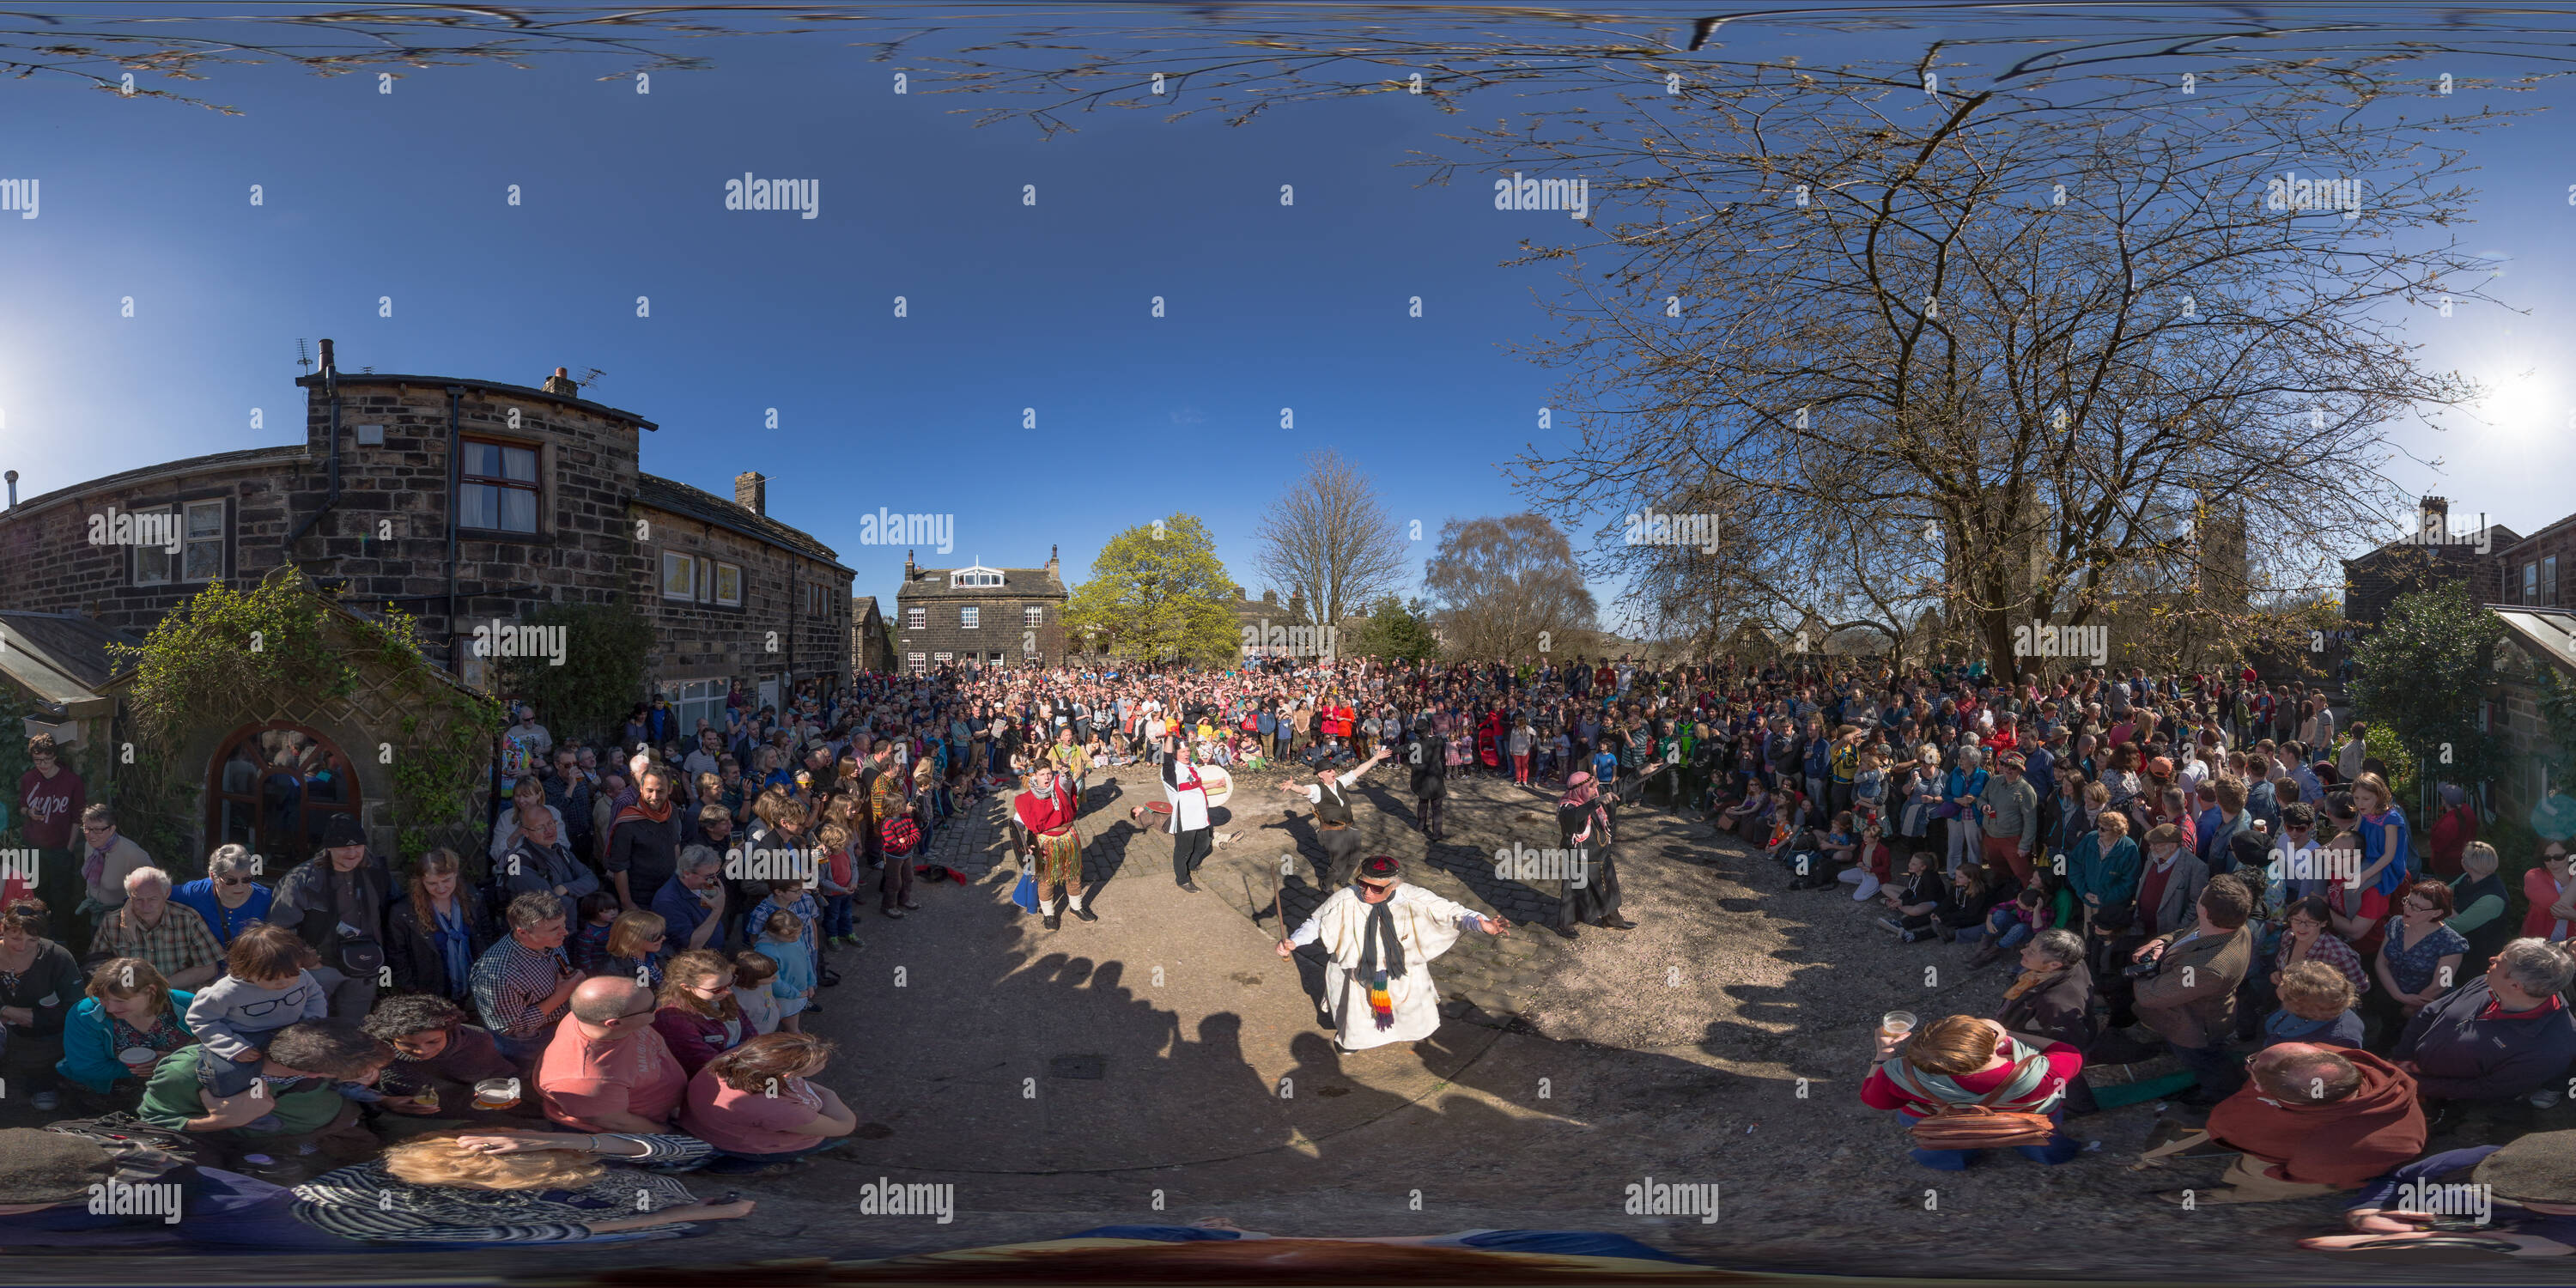 360 degree panoramic view of Performing the Pace Egg play at Heptonstall, Good Friday 2014 (view 2)